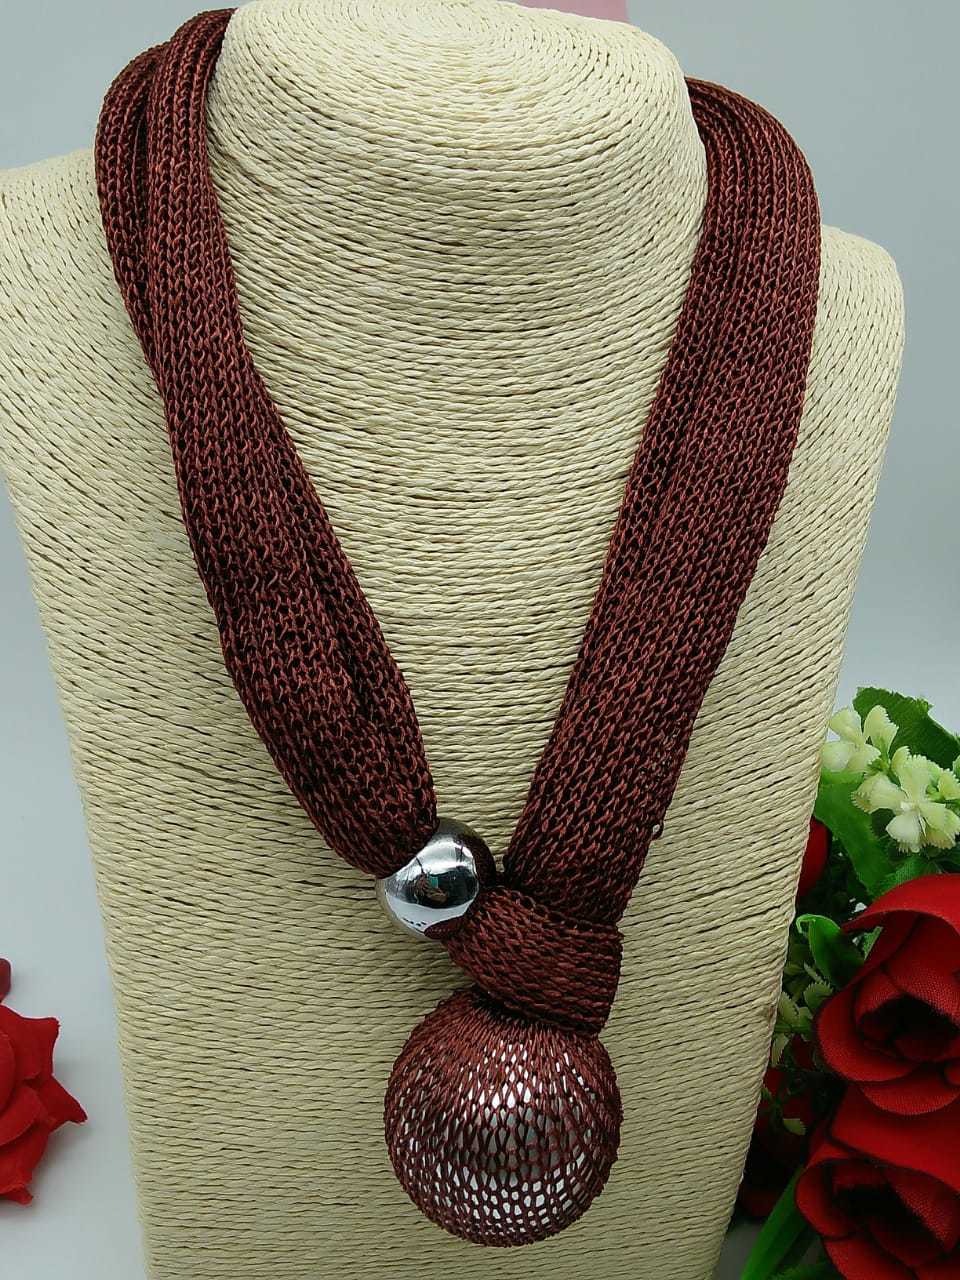 Fabric Net Necklace